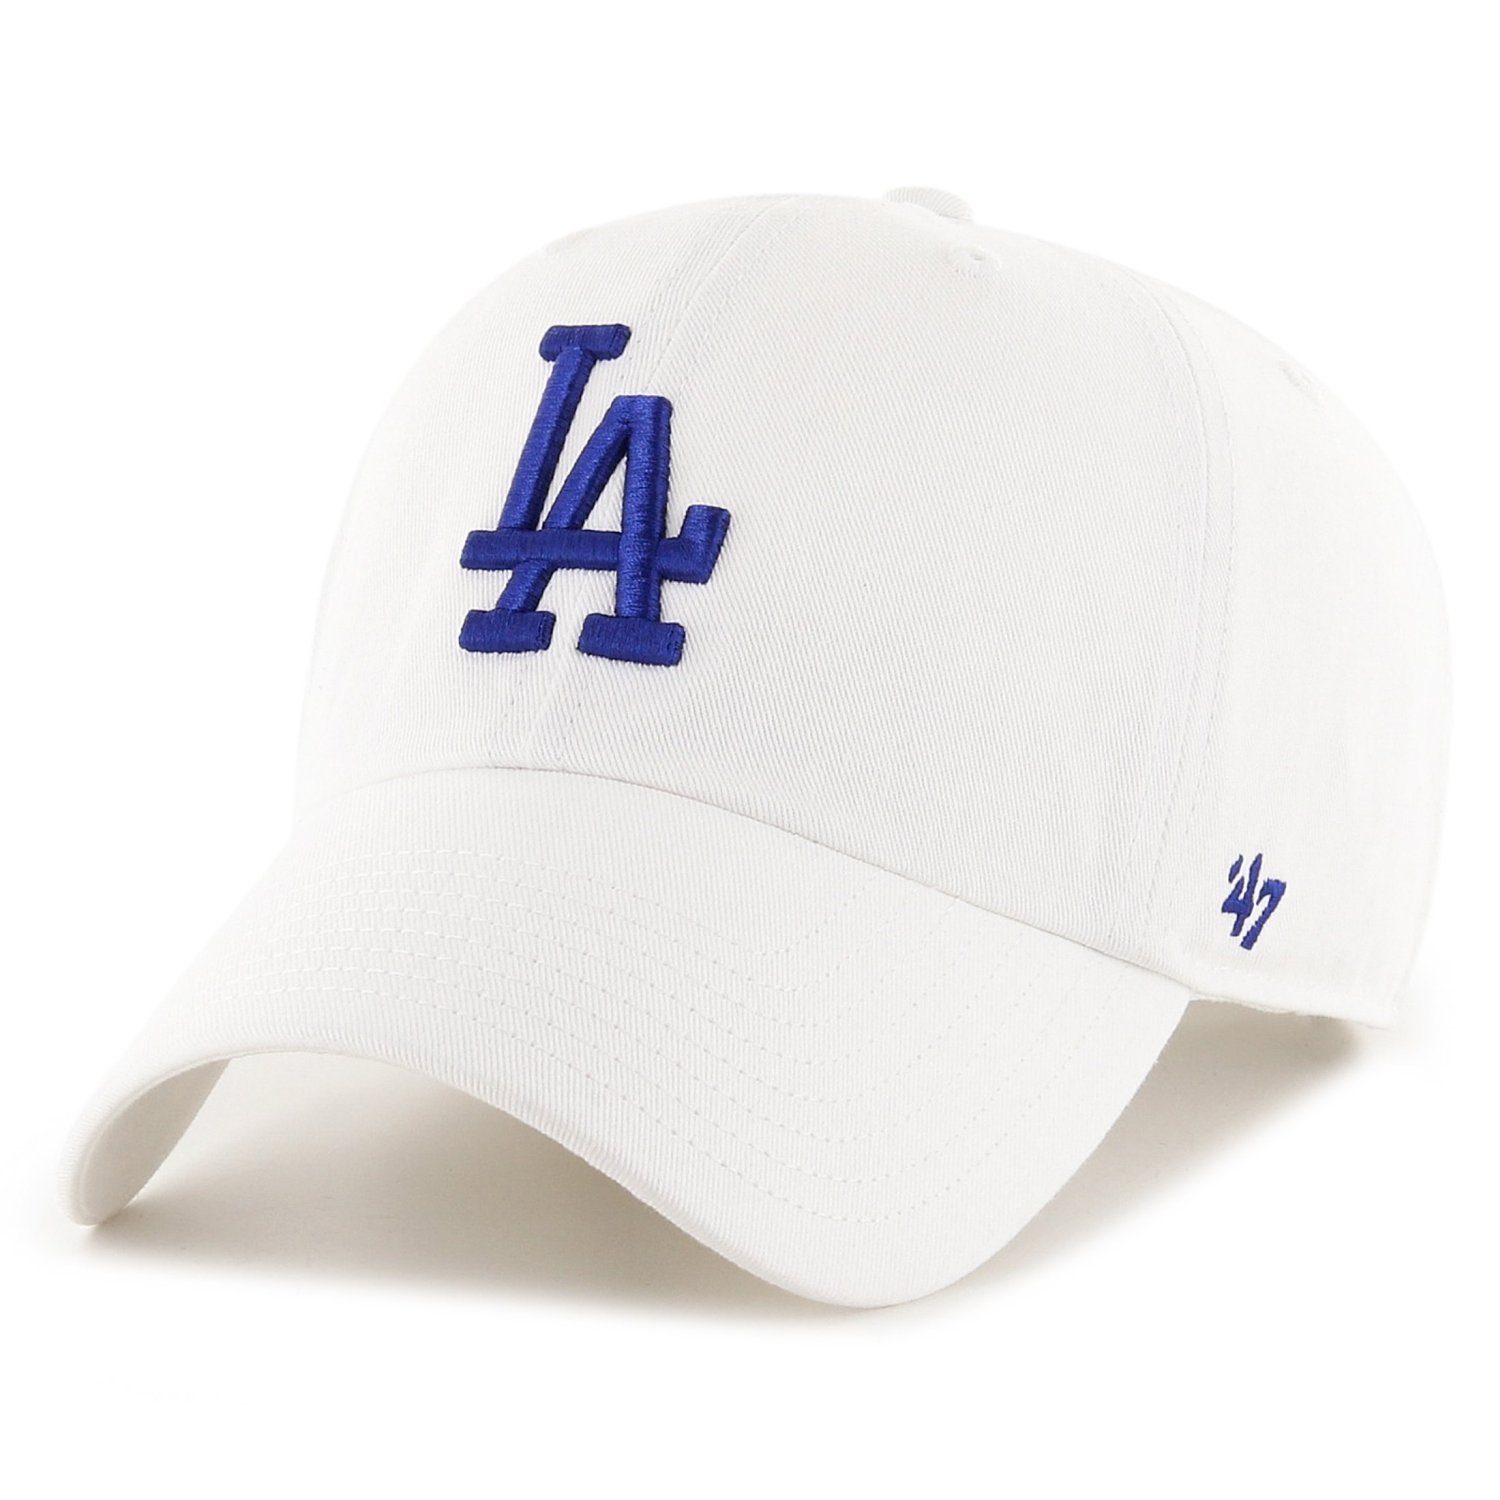 Cap Fit Trucker CLEANUP '47 Angeles Los Brand Dodgers Relaxed